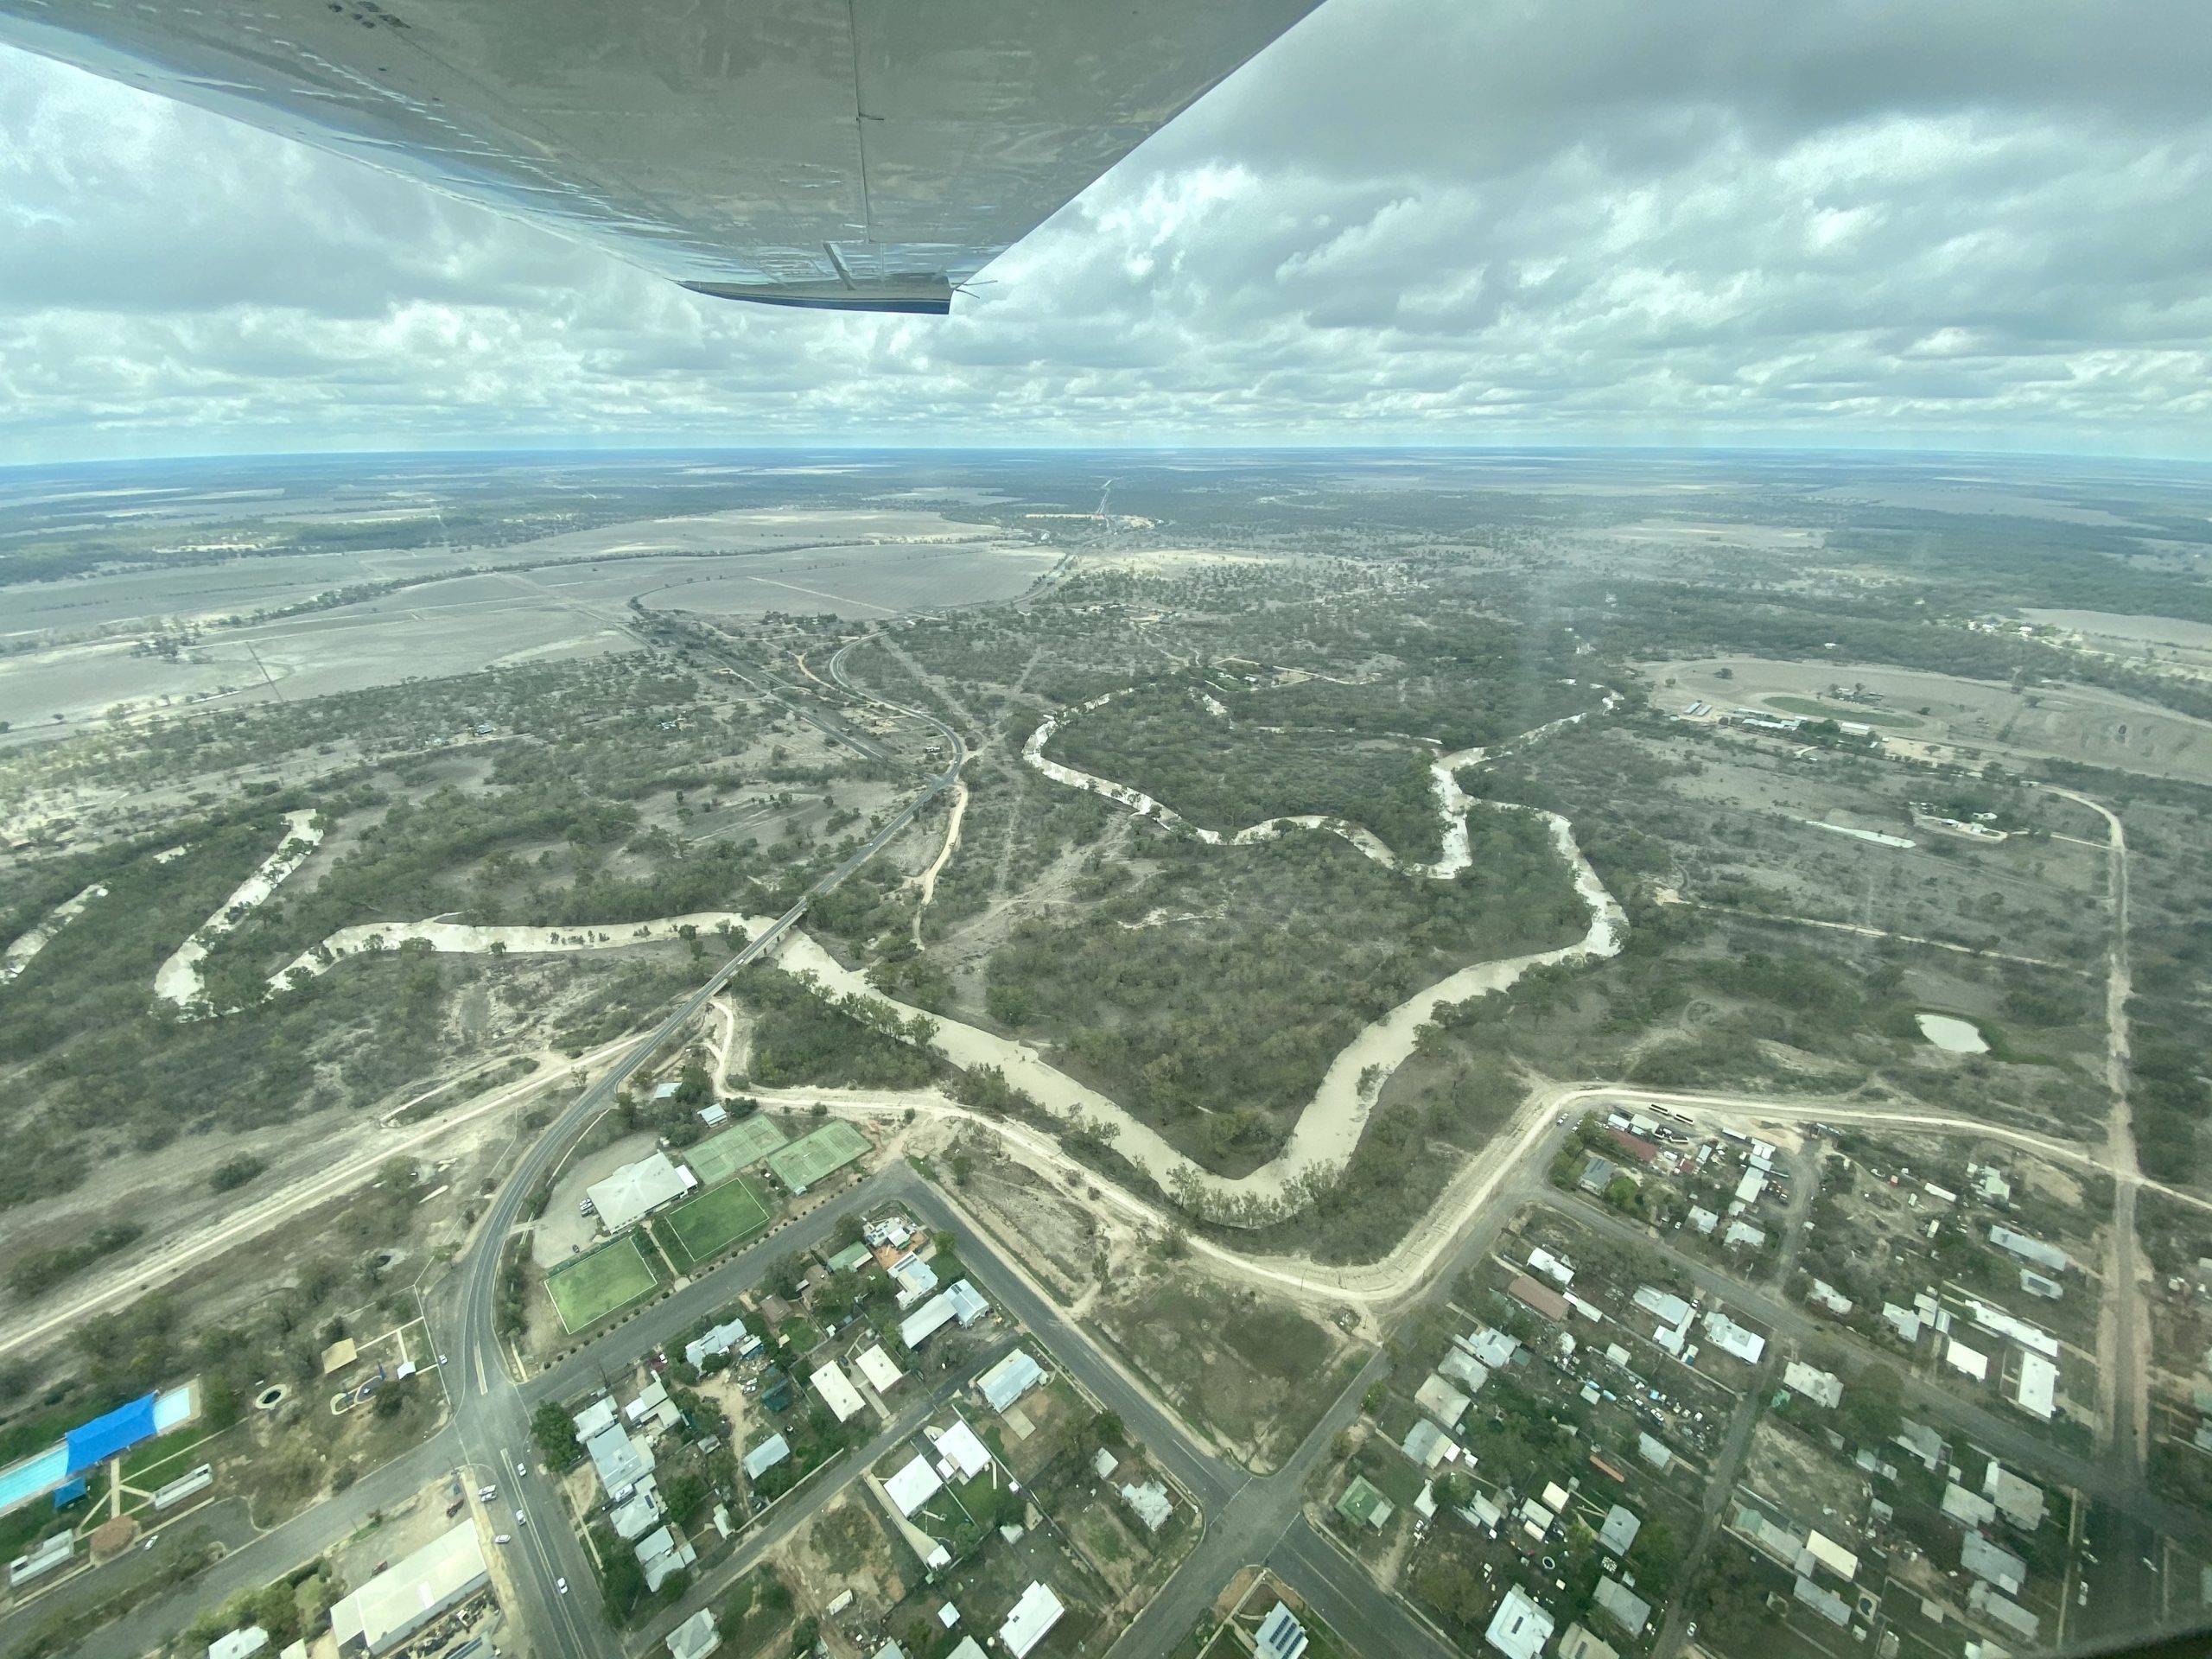 The Namoi River flowing to and around Walgett. Walgett township has recorded about 100mm so far this year but the rainfall has varied on surrounding farmland.